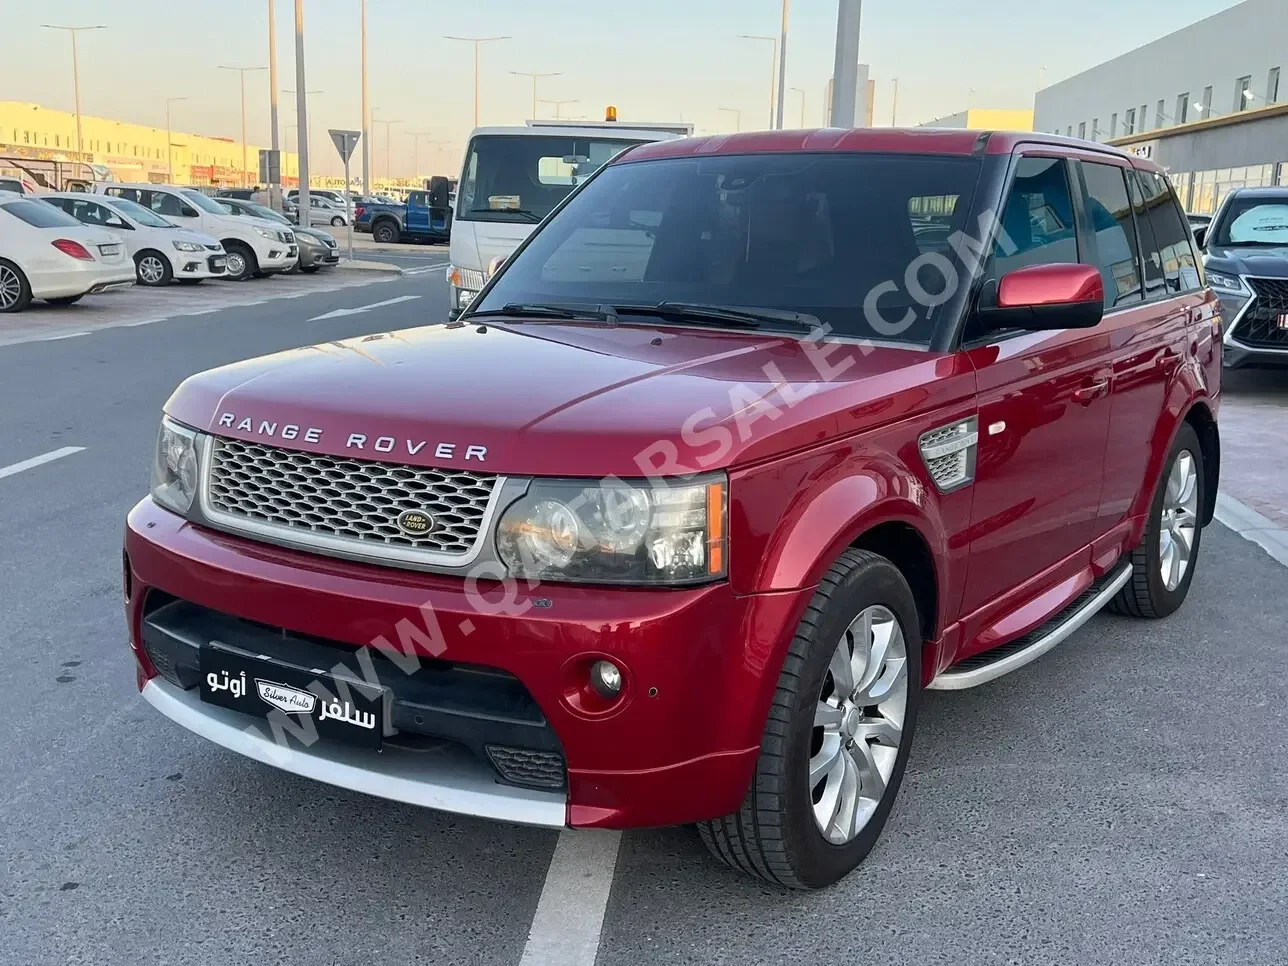 Land Rover  Range Rover  Sport SE  2012  Automatic  85,000 Km  8 Cylinder  All Wheel Drive (AWD)  SUV  Red